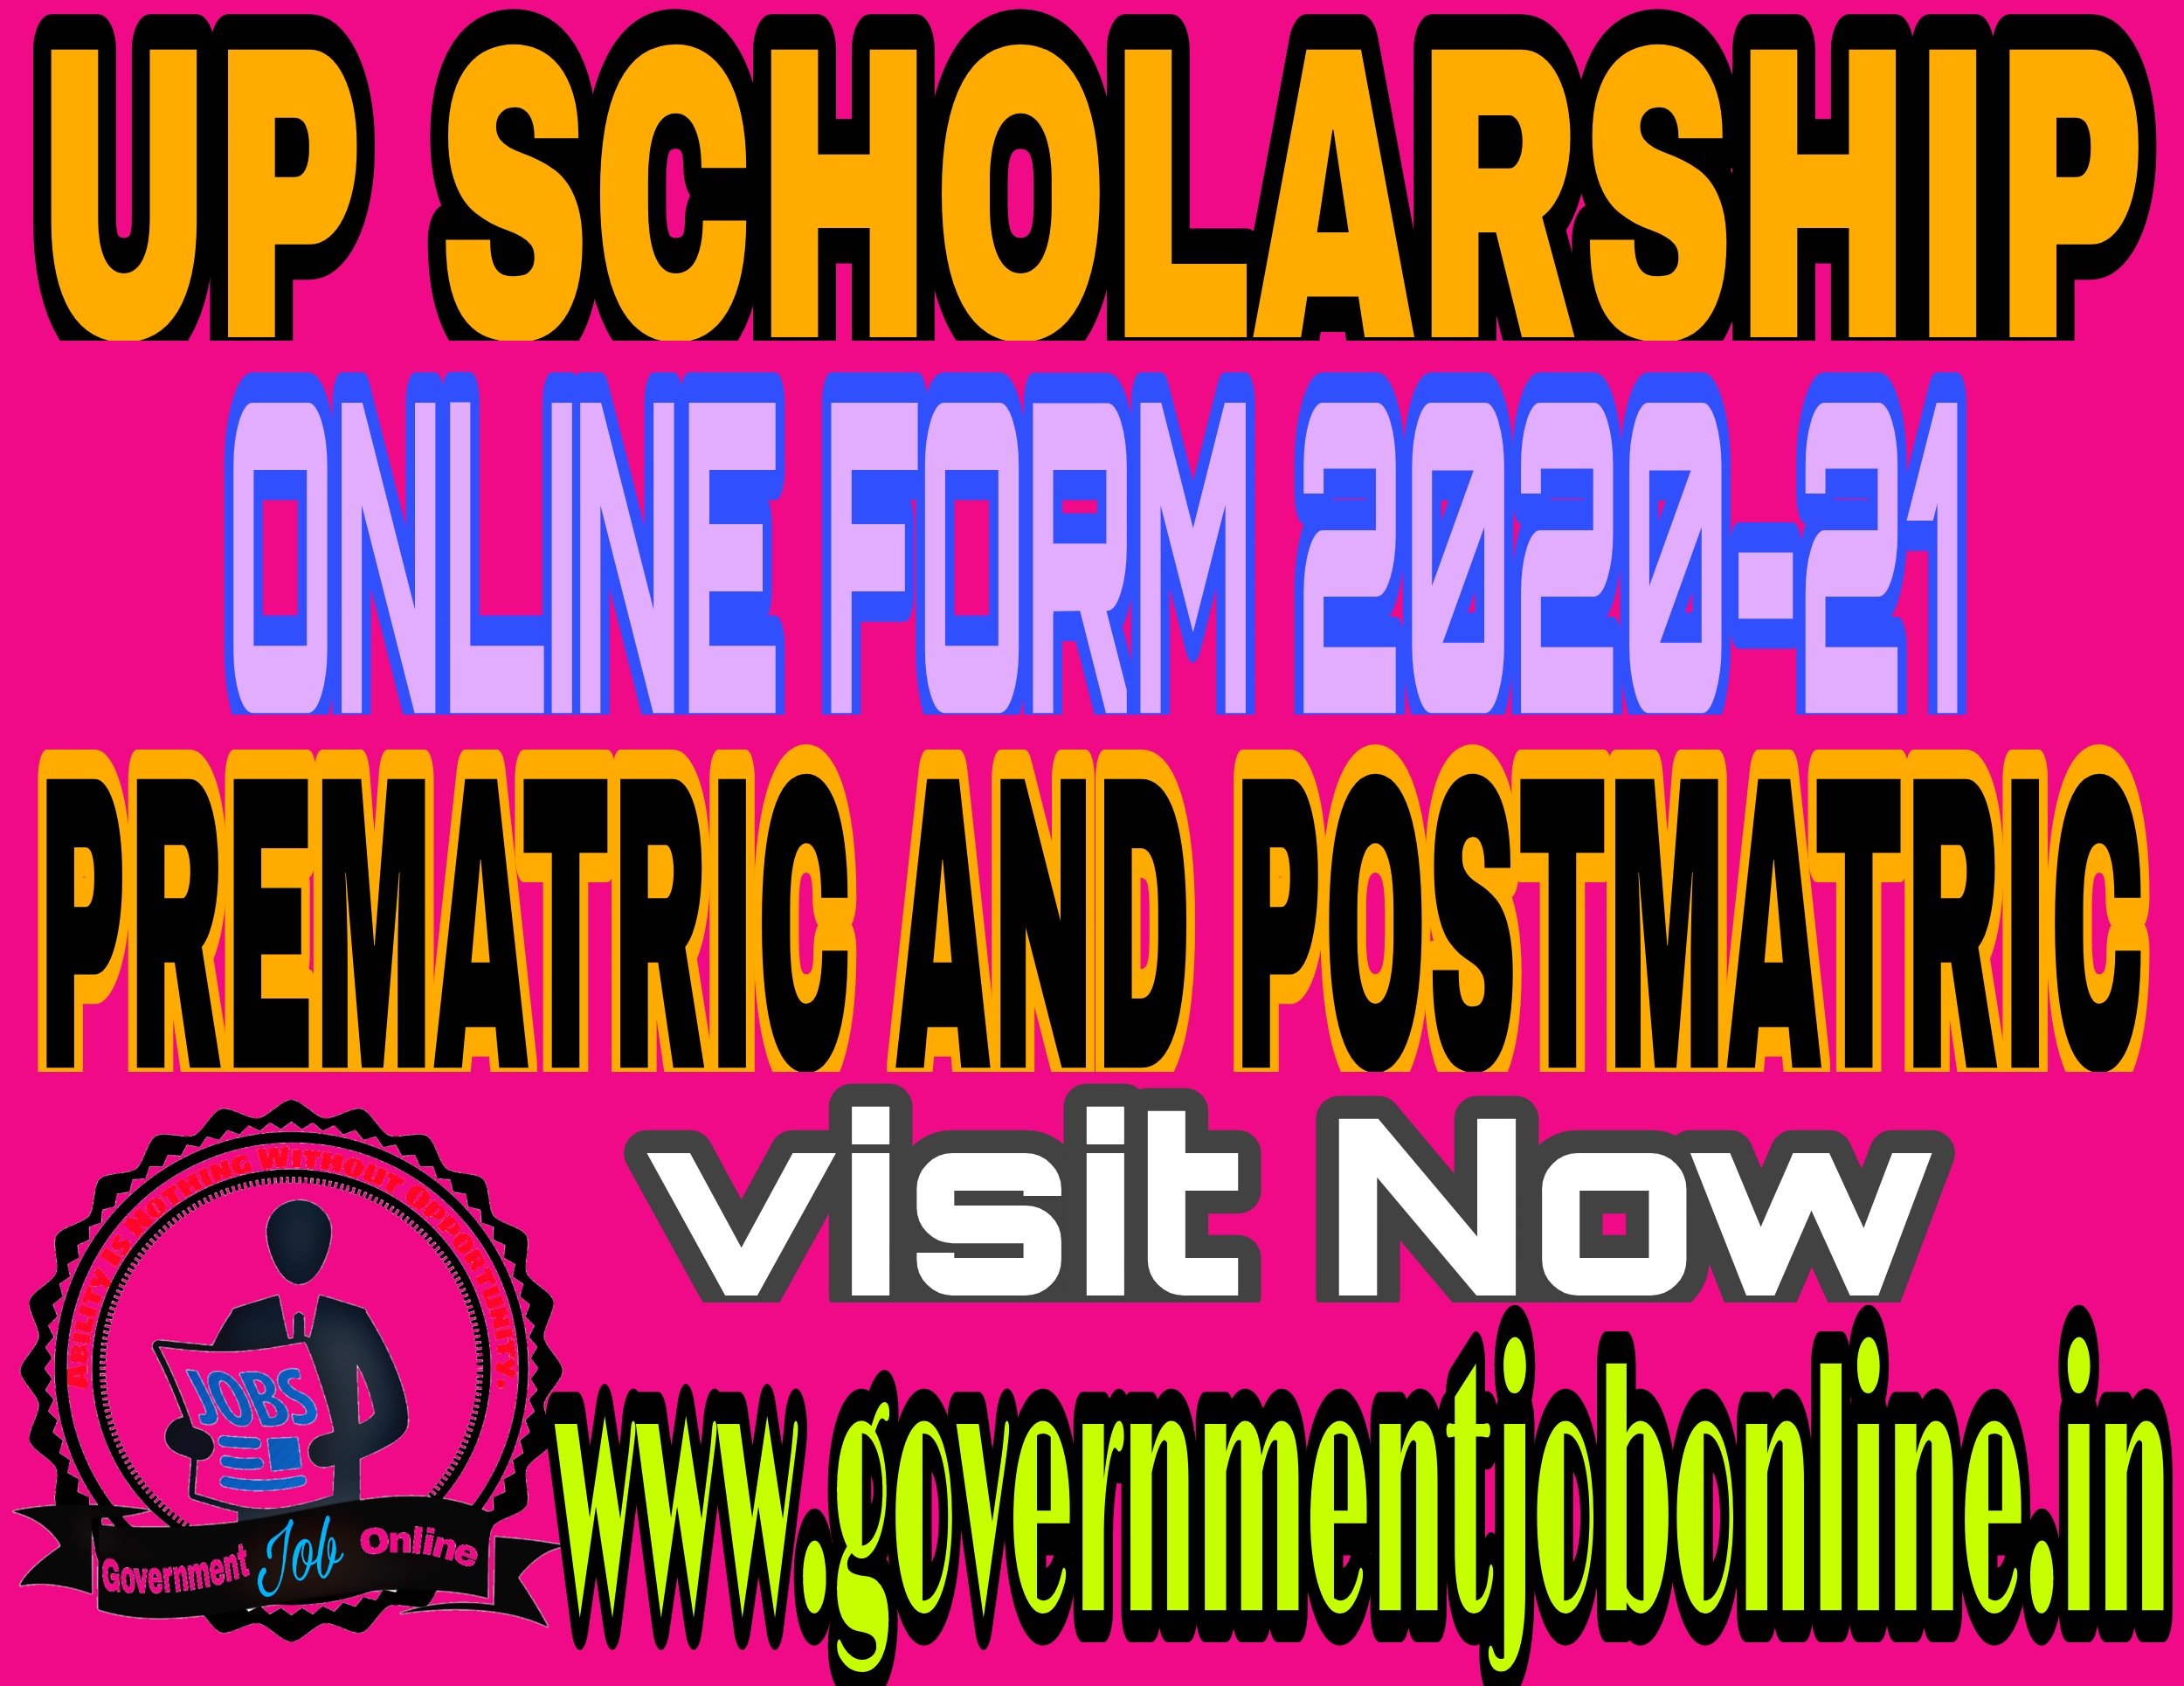 Up scholarship online form 2020-21prematric and postmatric